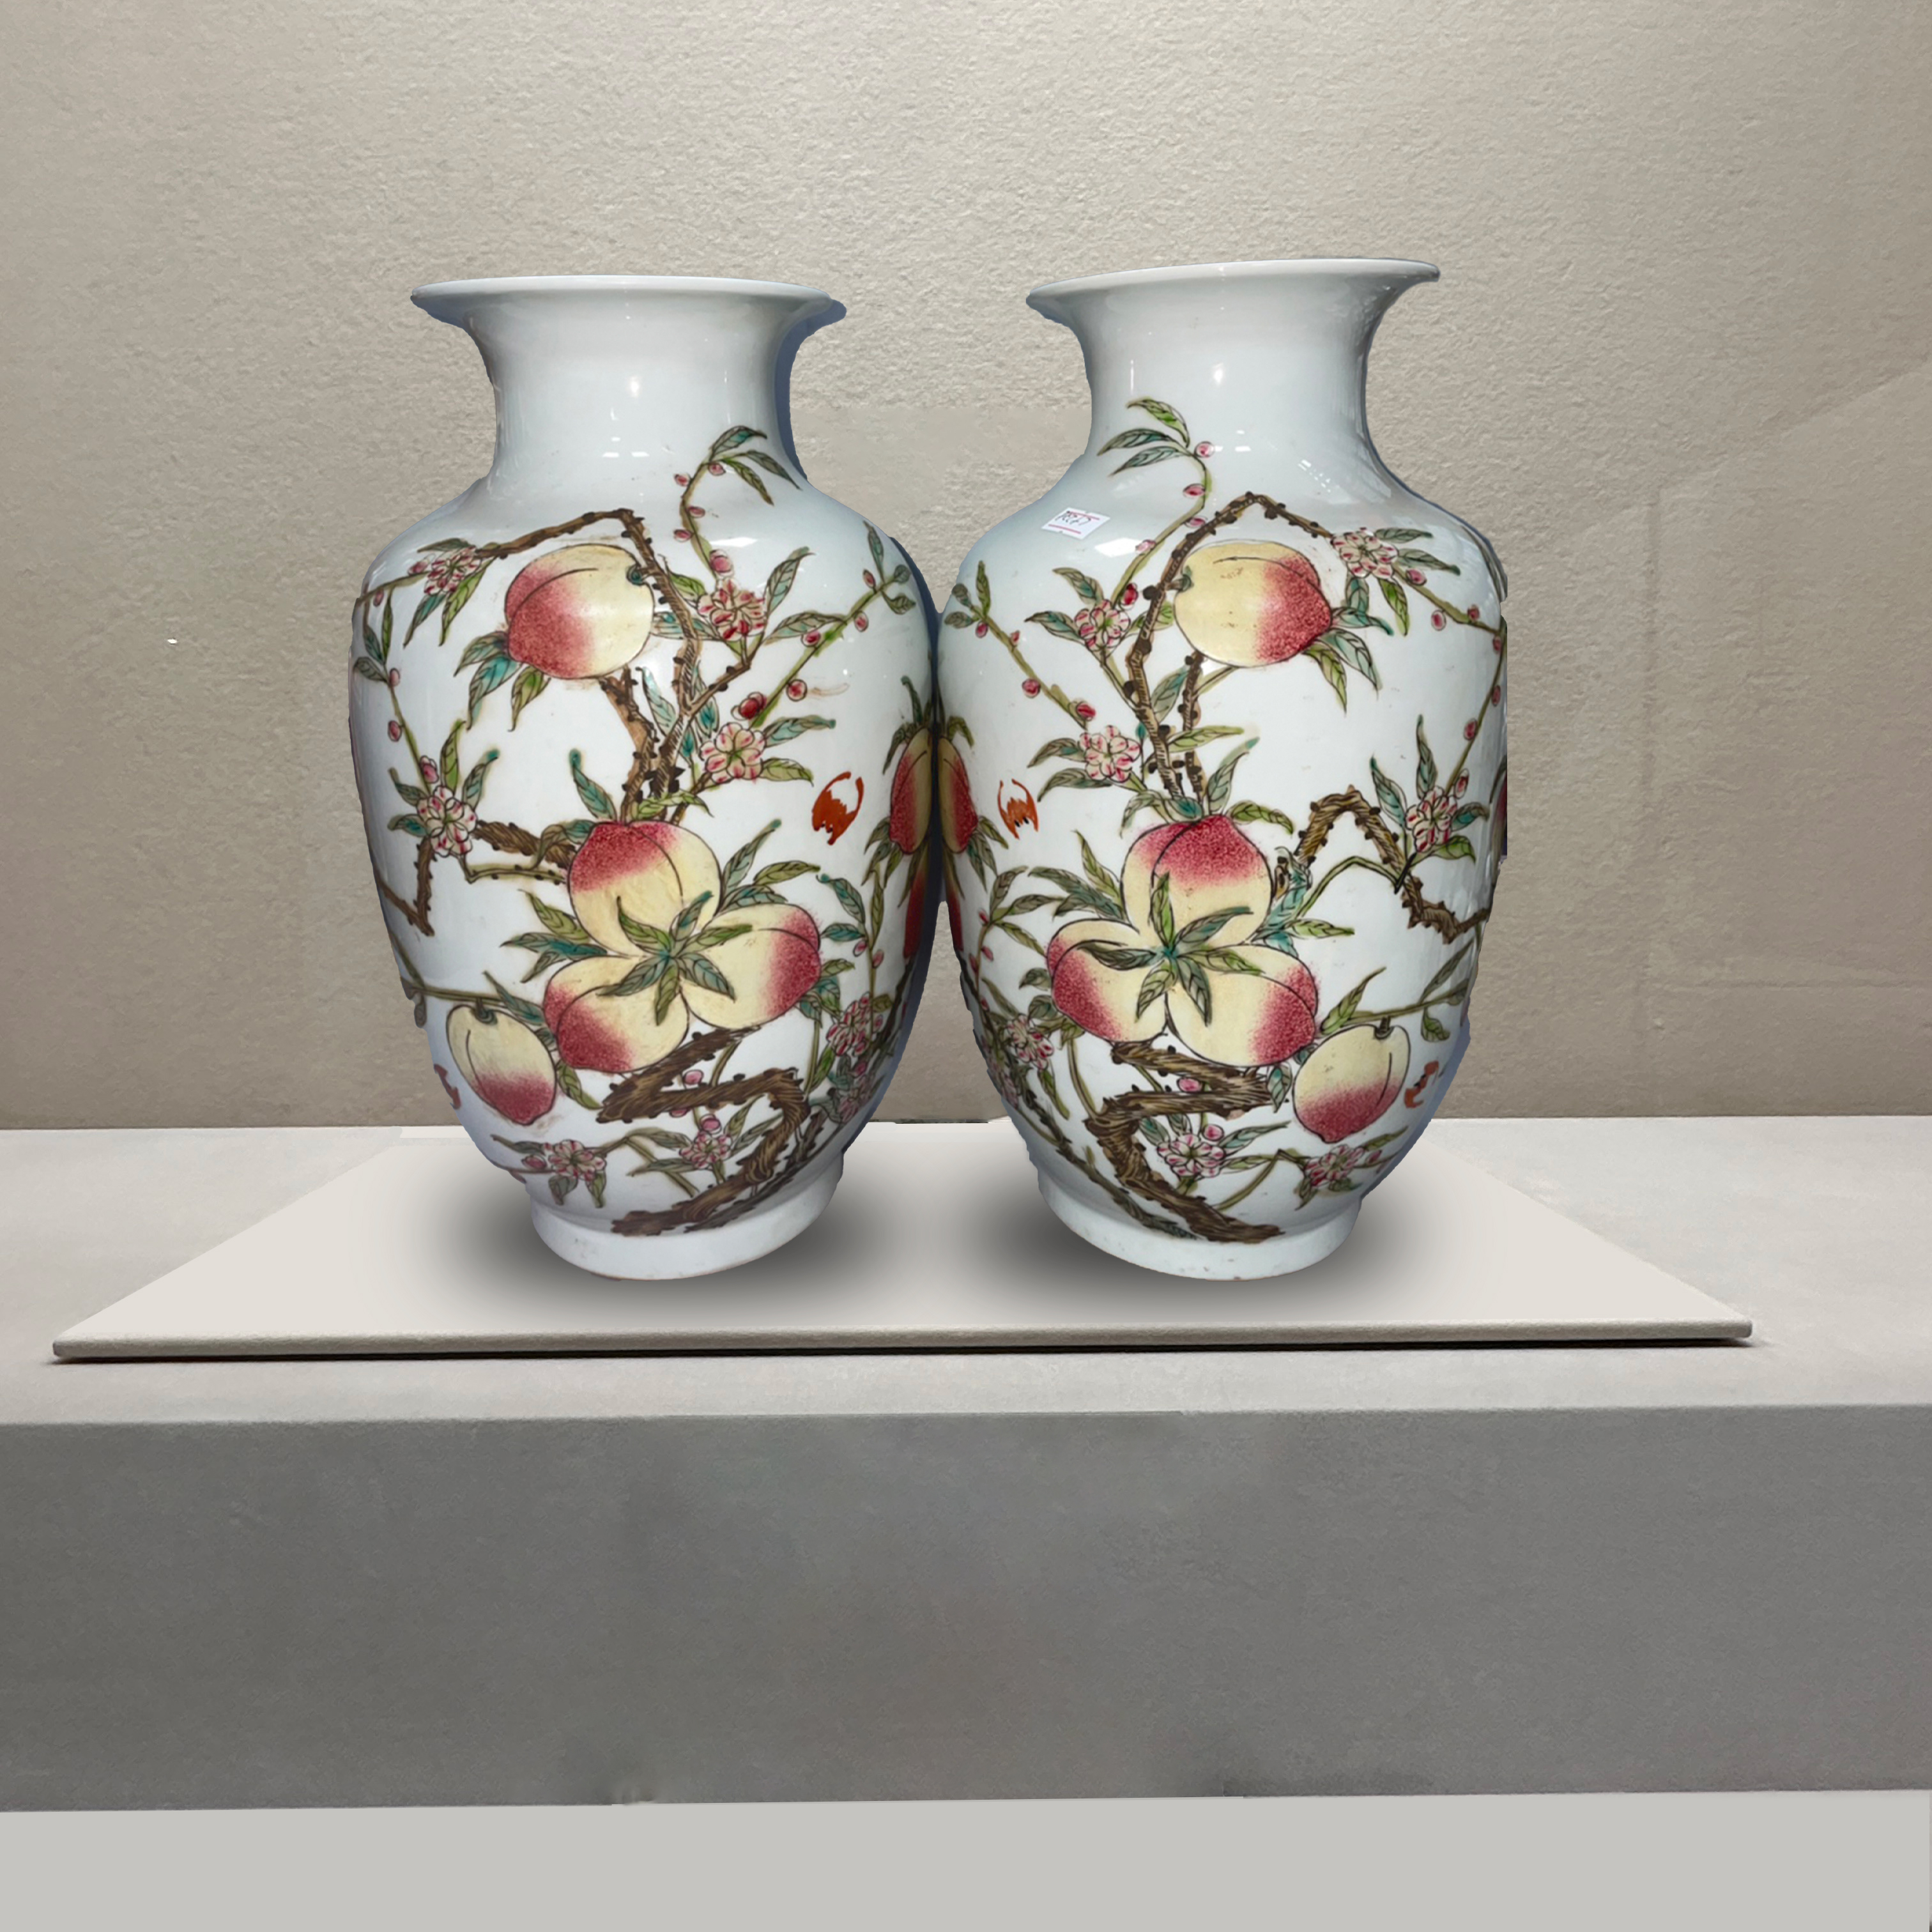 Nine-year-old peach vase made in the Yongzheng period of the Qing Dynasty